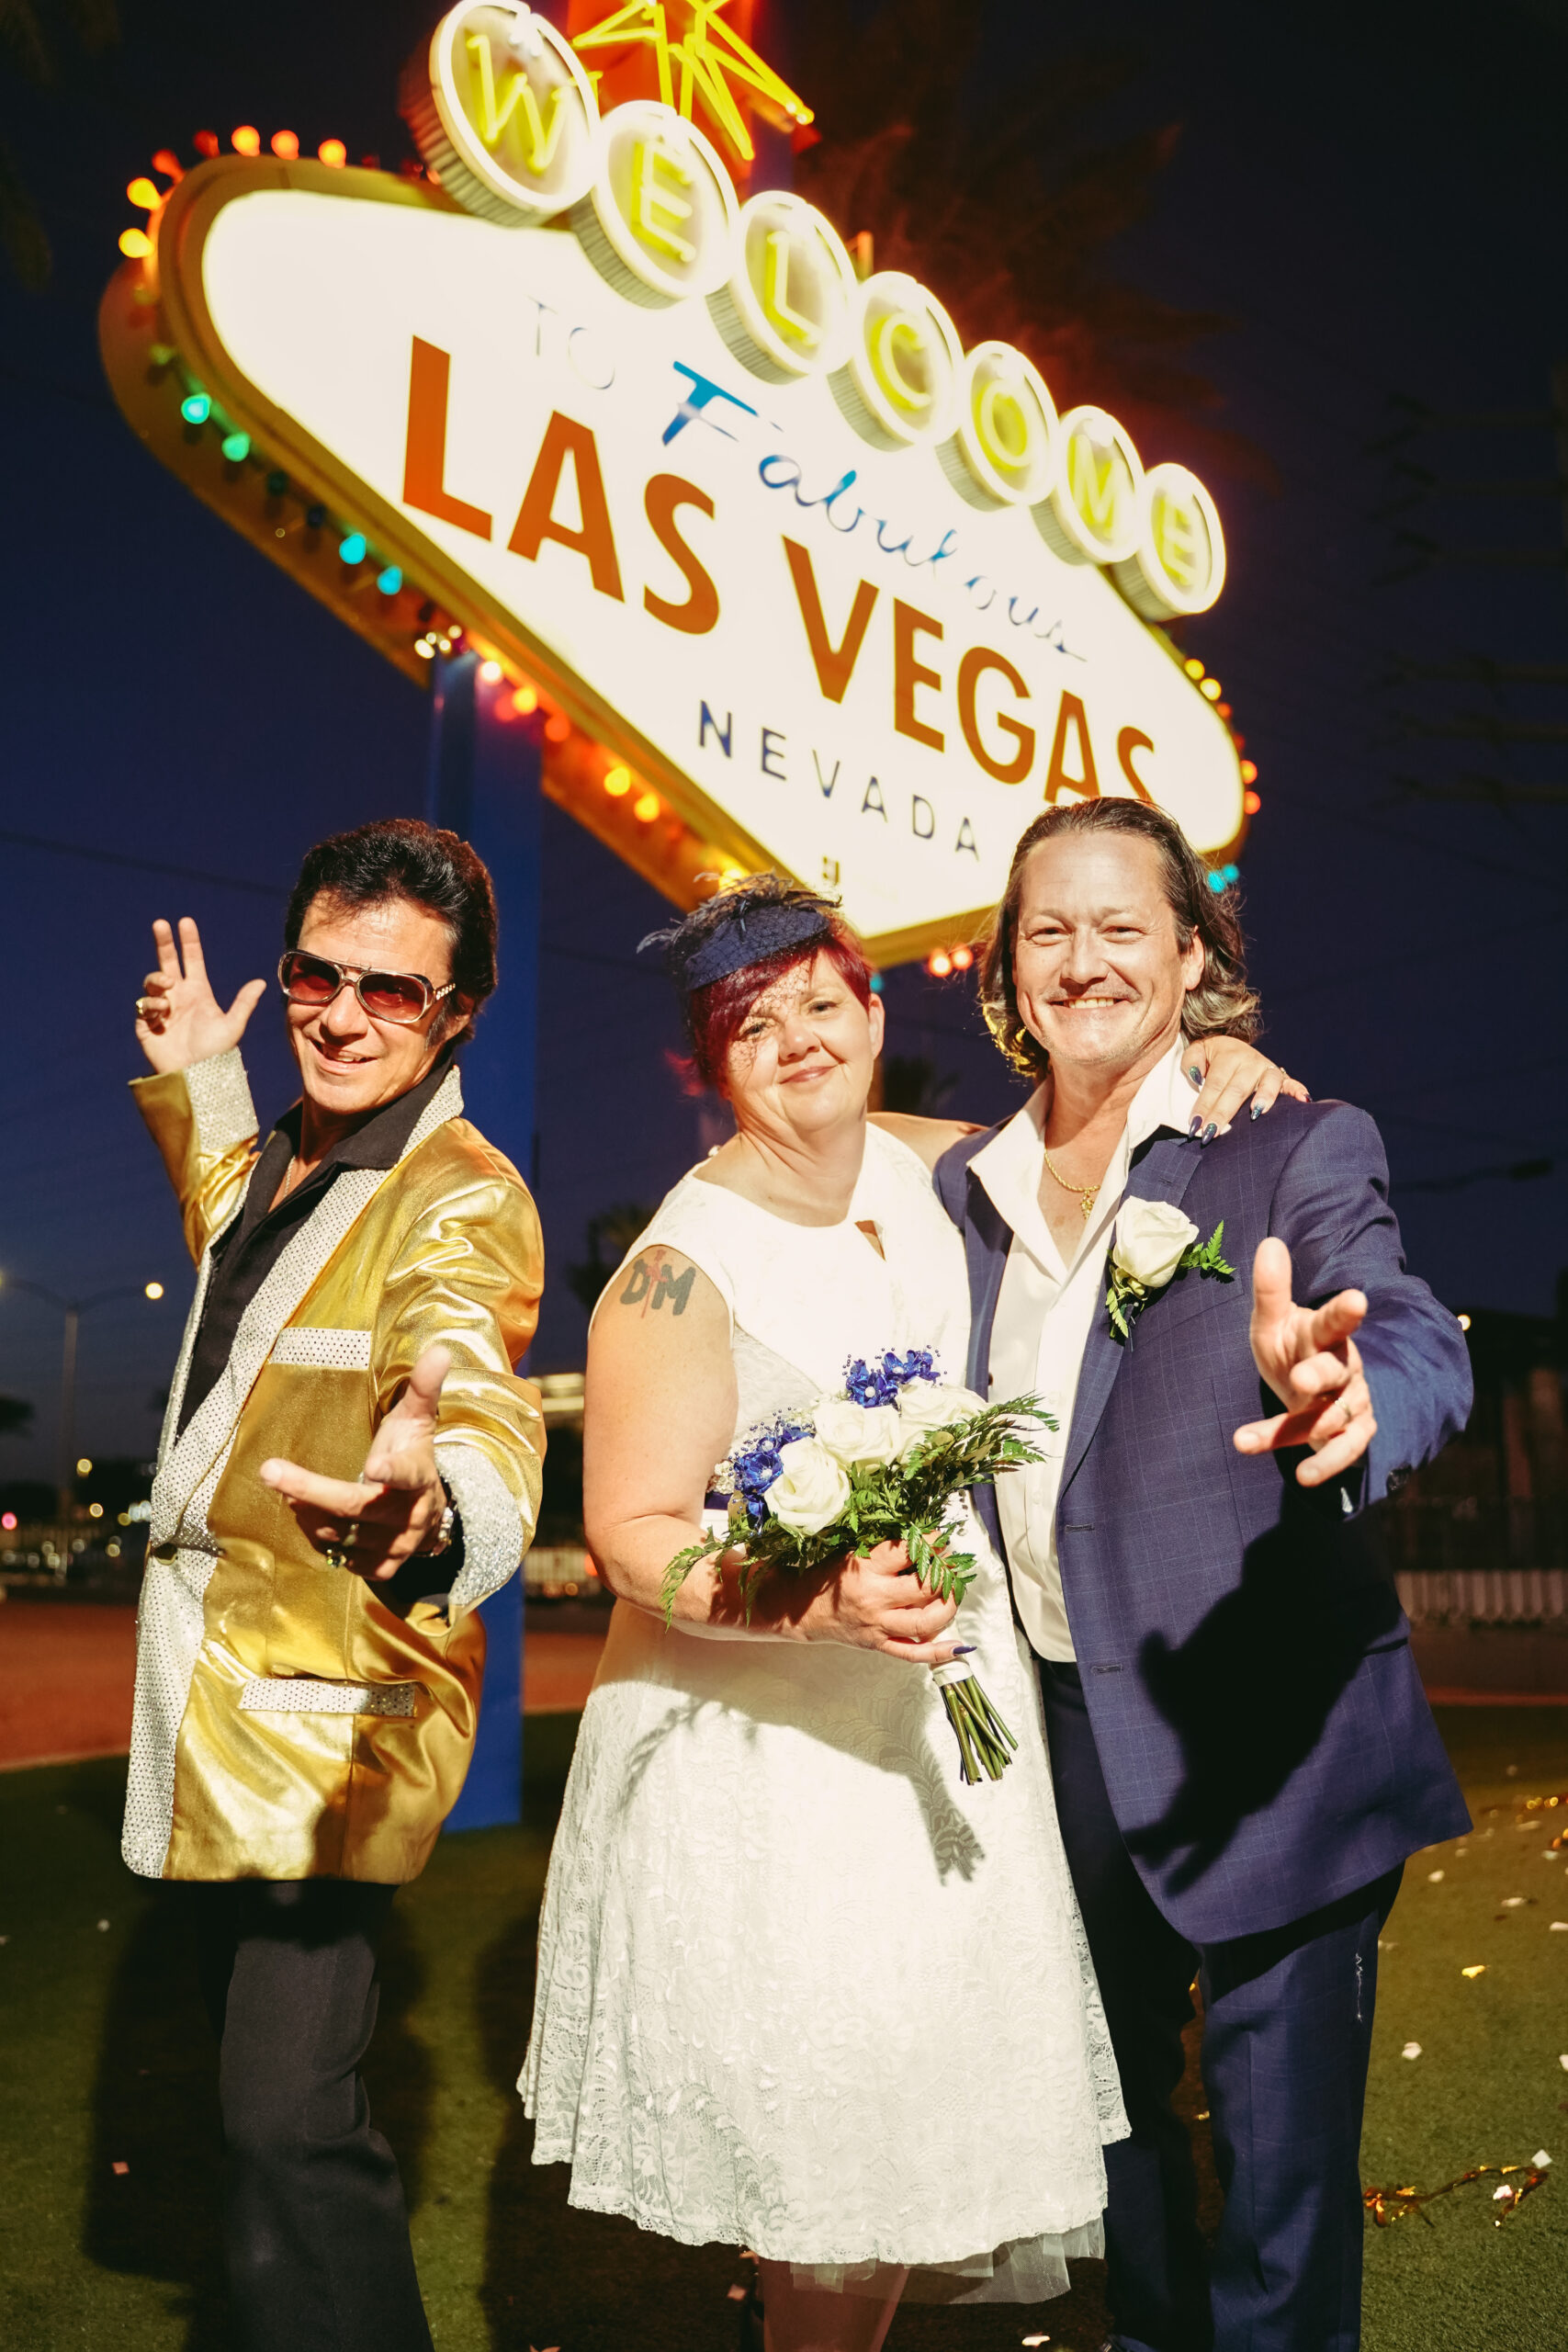 Elvis and Priscilla Presley impersonators to marry with costumed